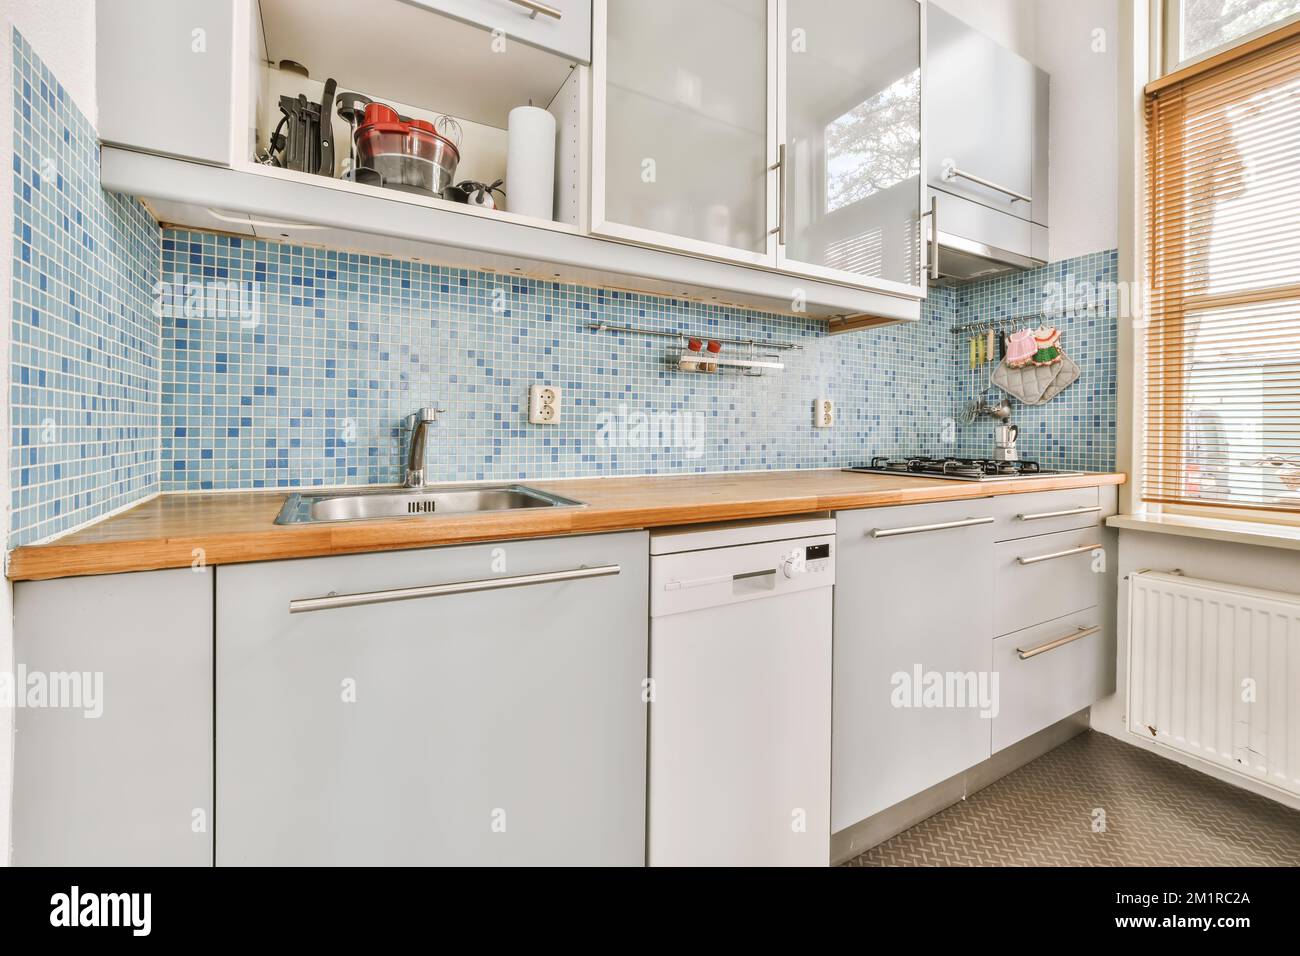 https://c8.alamy.com/comp/2M1RC2A/a-kitchen-with-white-cabinets-and-blue-tiles-on-the-wall-behind-it-is-an-oven-dishwasher-and-sink-2M1RC2A.jpg